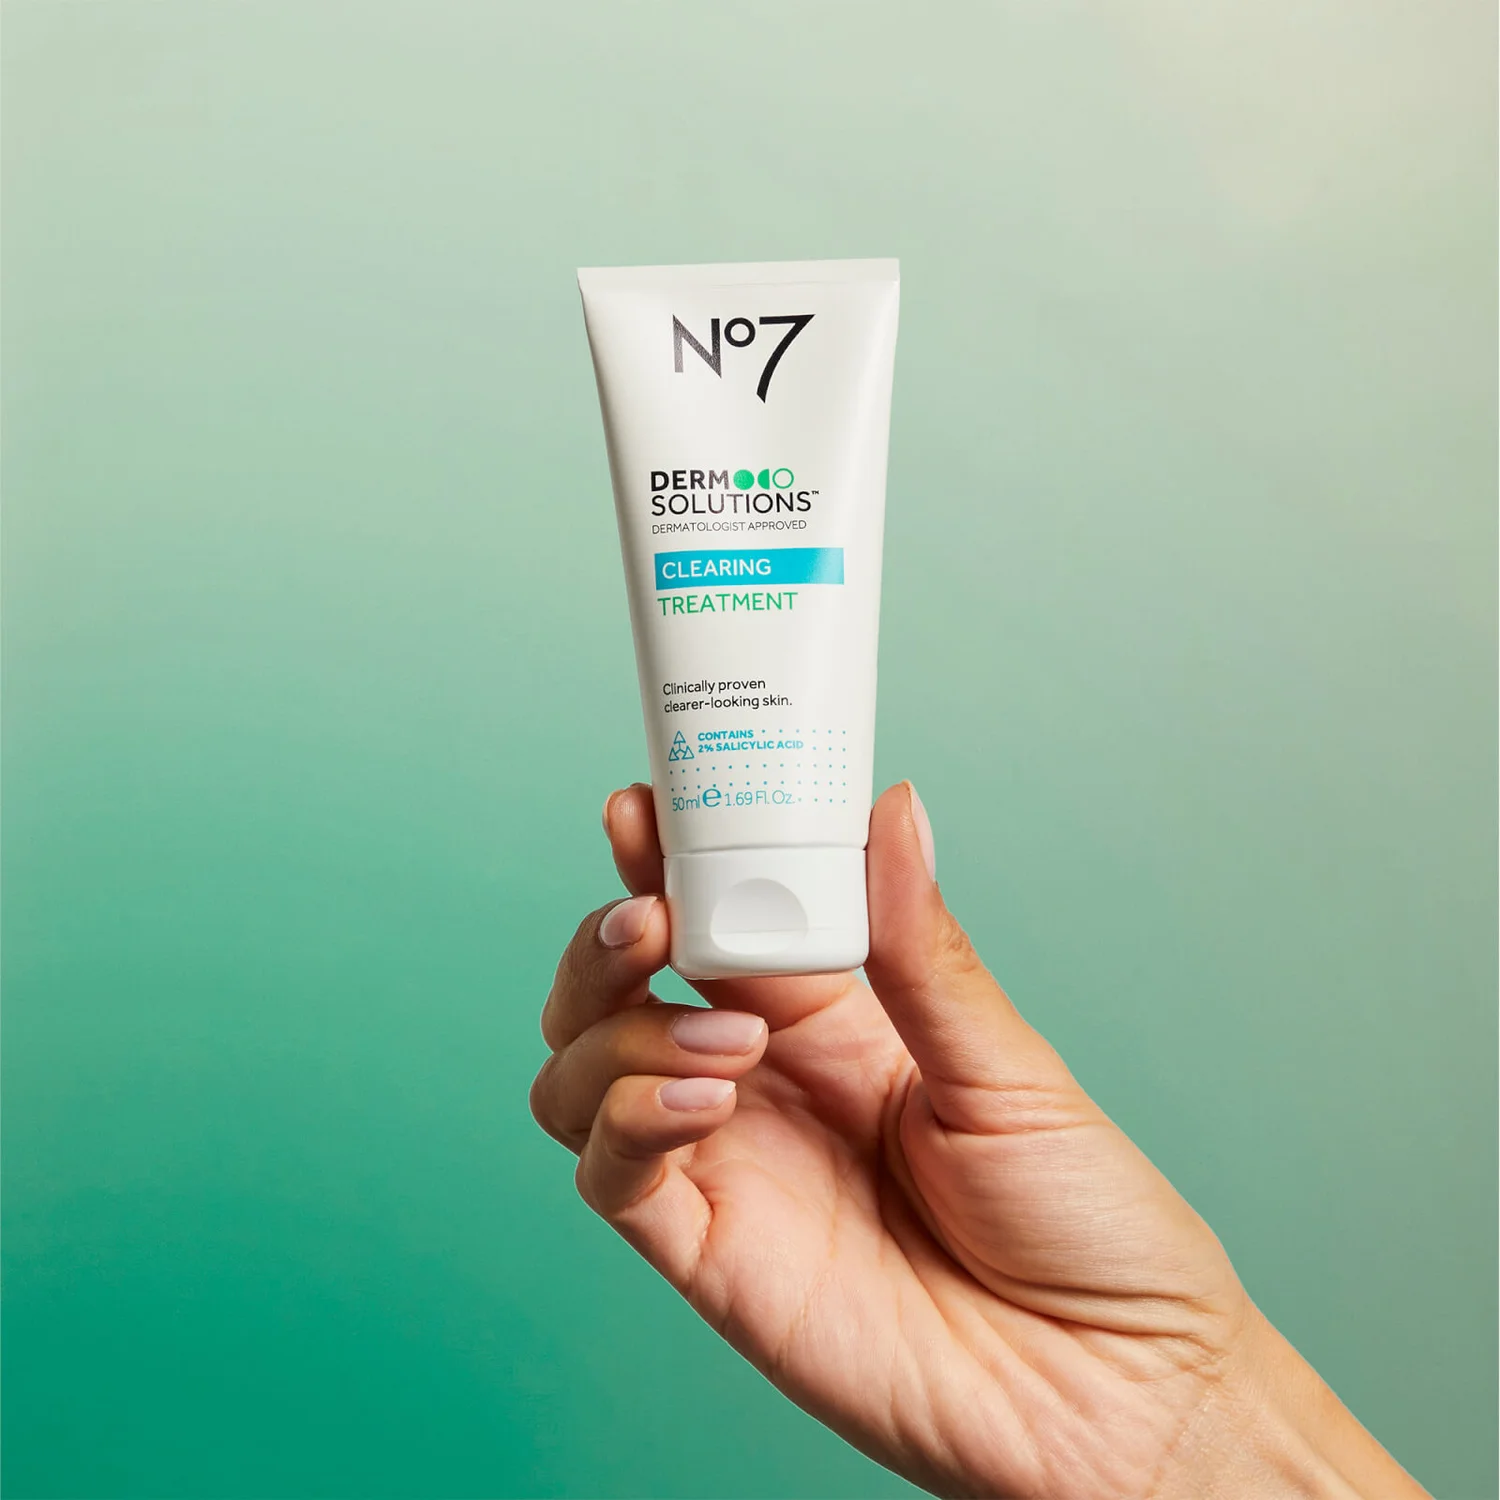 No7 skincare review: We try the affordable skincare range